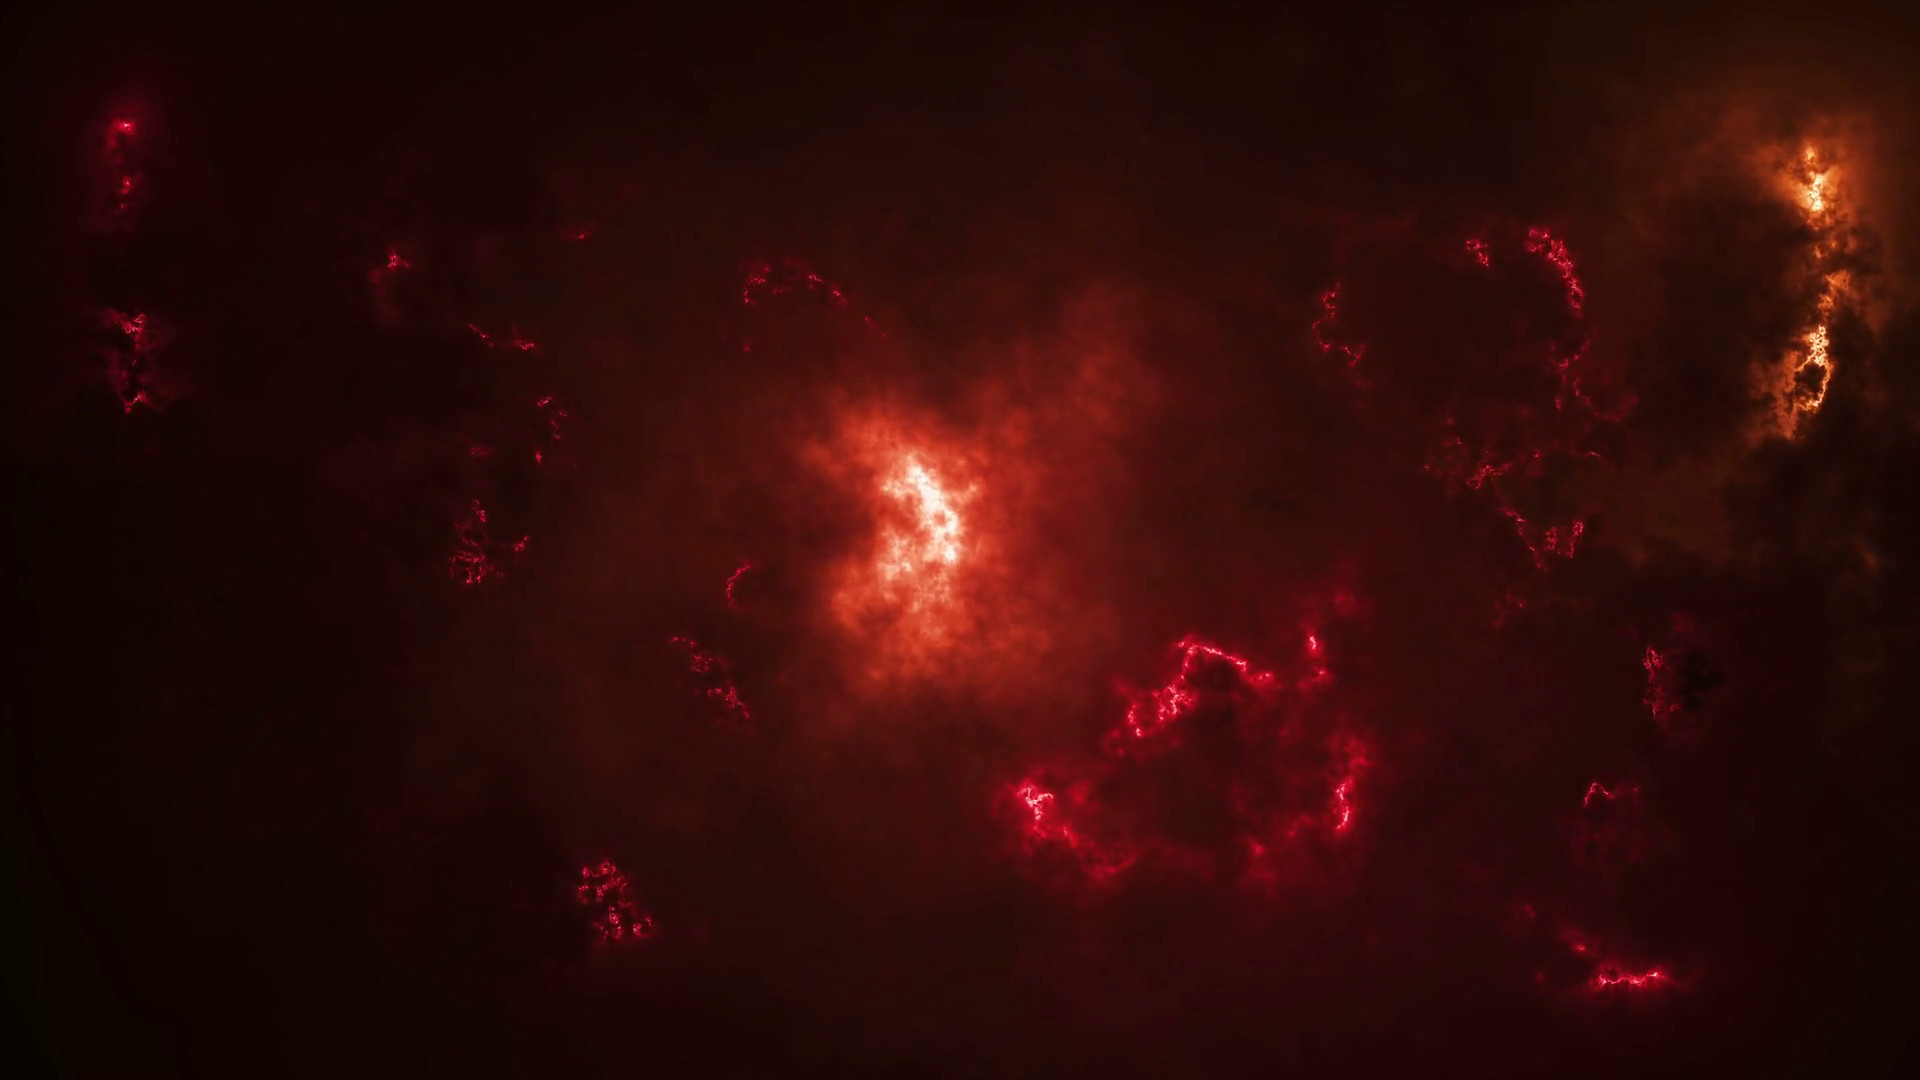 1920x1080 severe thunderstorm clouds at night with lightning, Hell Background.  abstract smoke & fume. Epic Red luminous background for your intro with  space for your ...